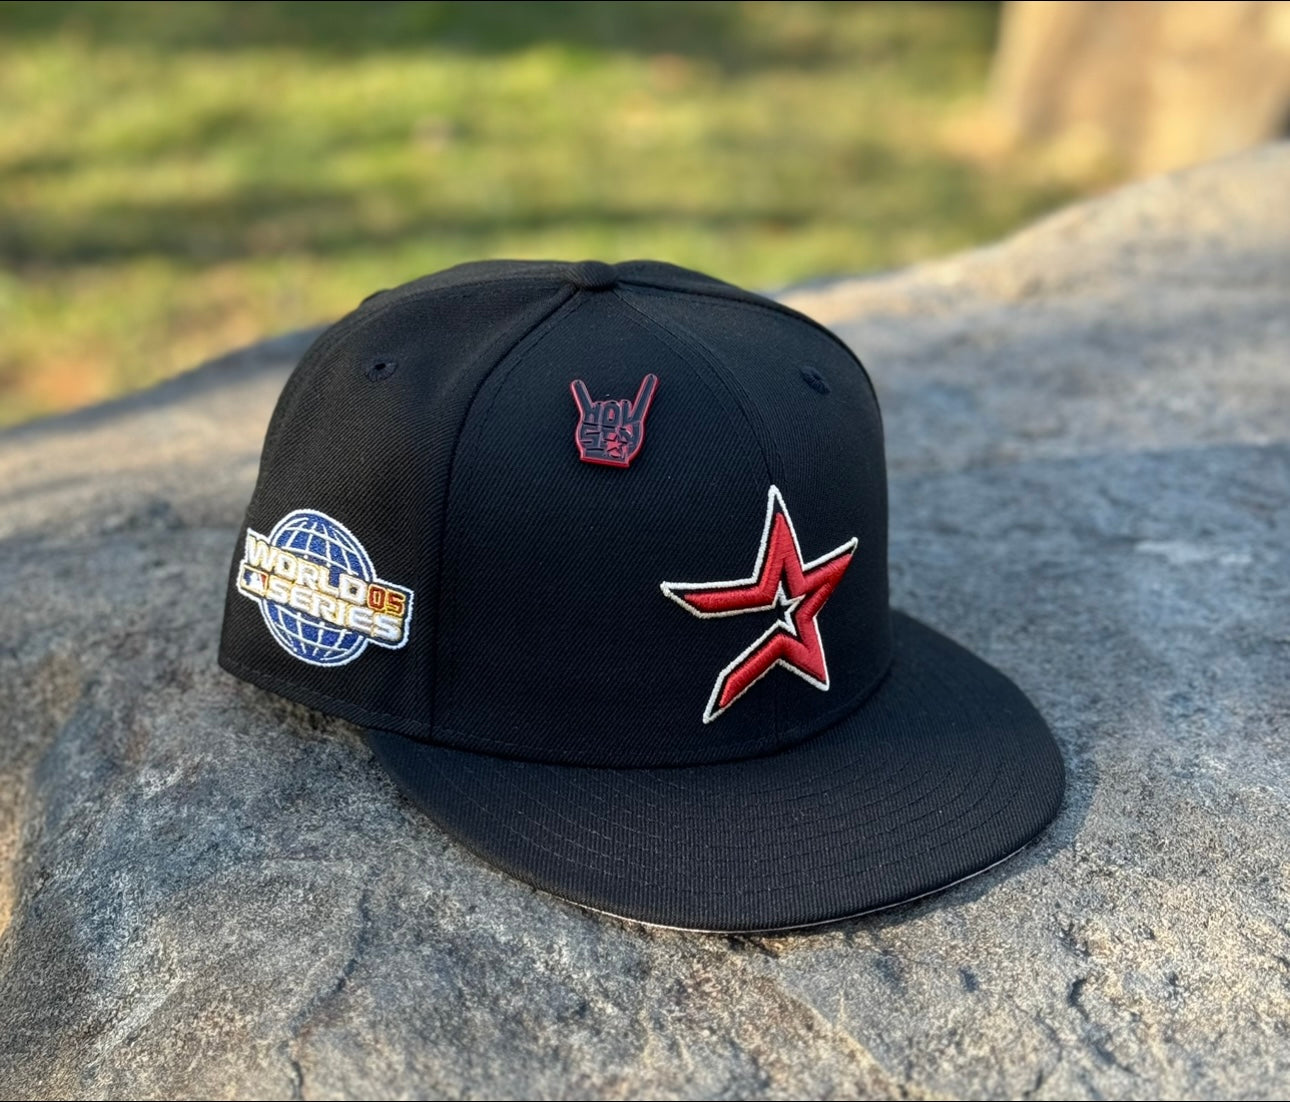 Houston Astros Open Star with 2005 World Series Side Patch Fitted Hat New Era 5950 (Black/Brick Red/Pink)